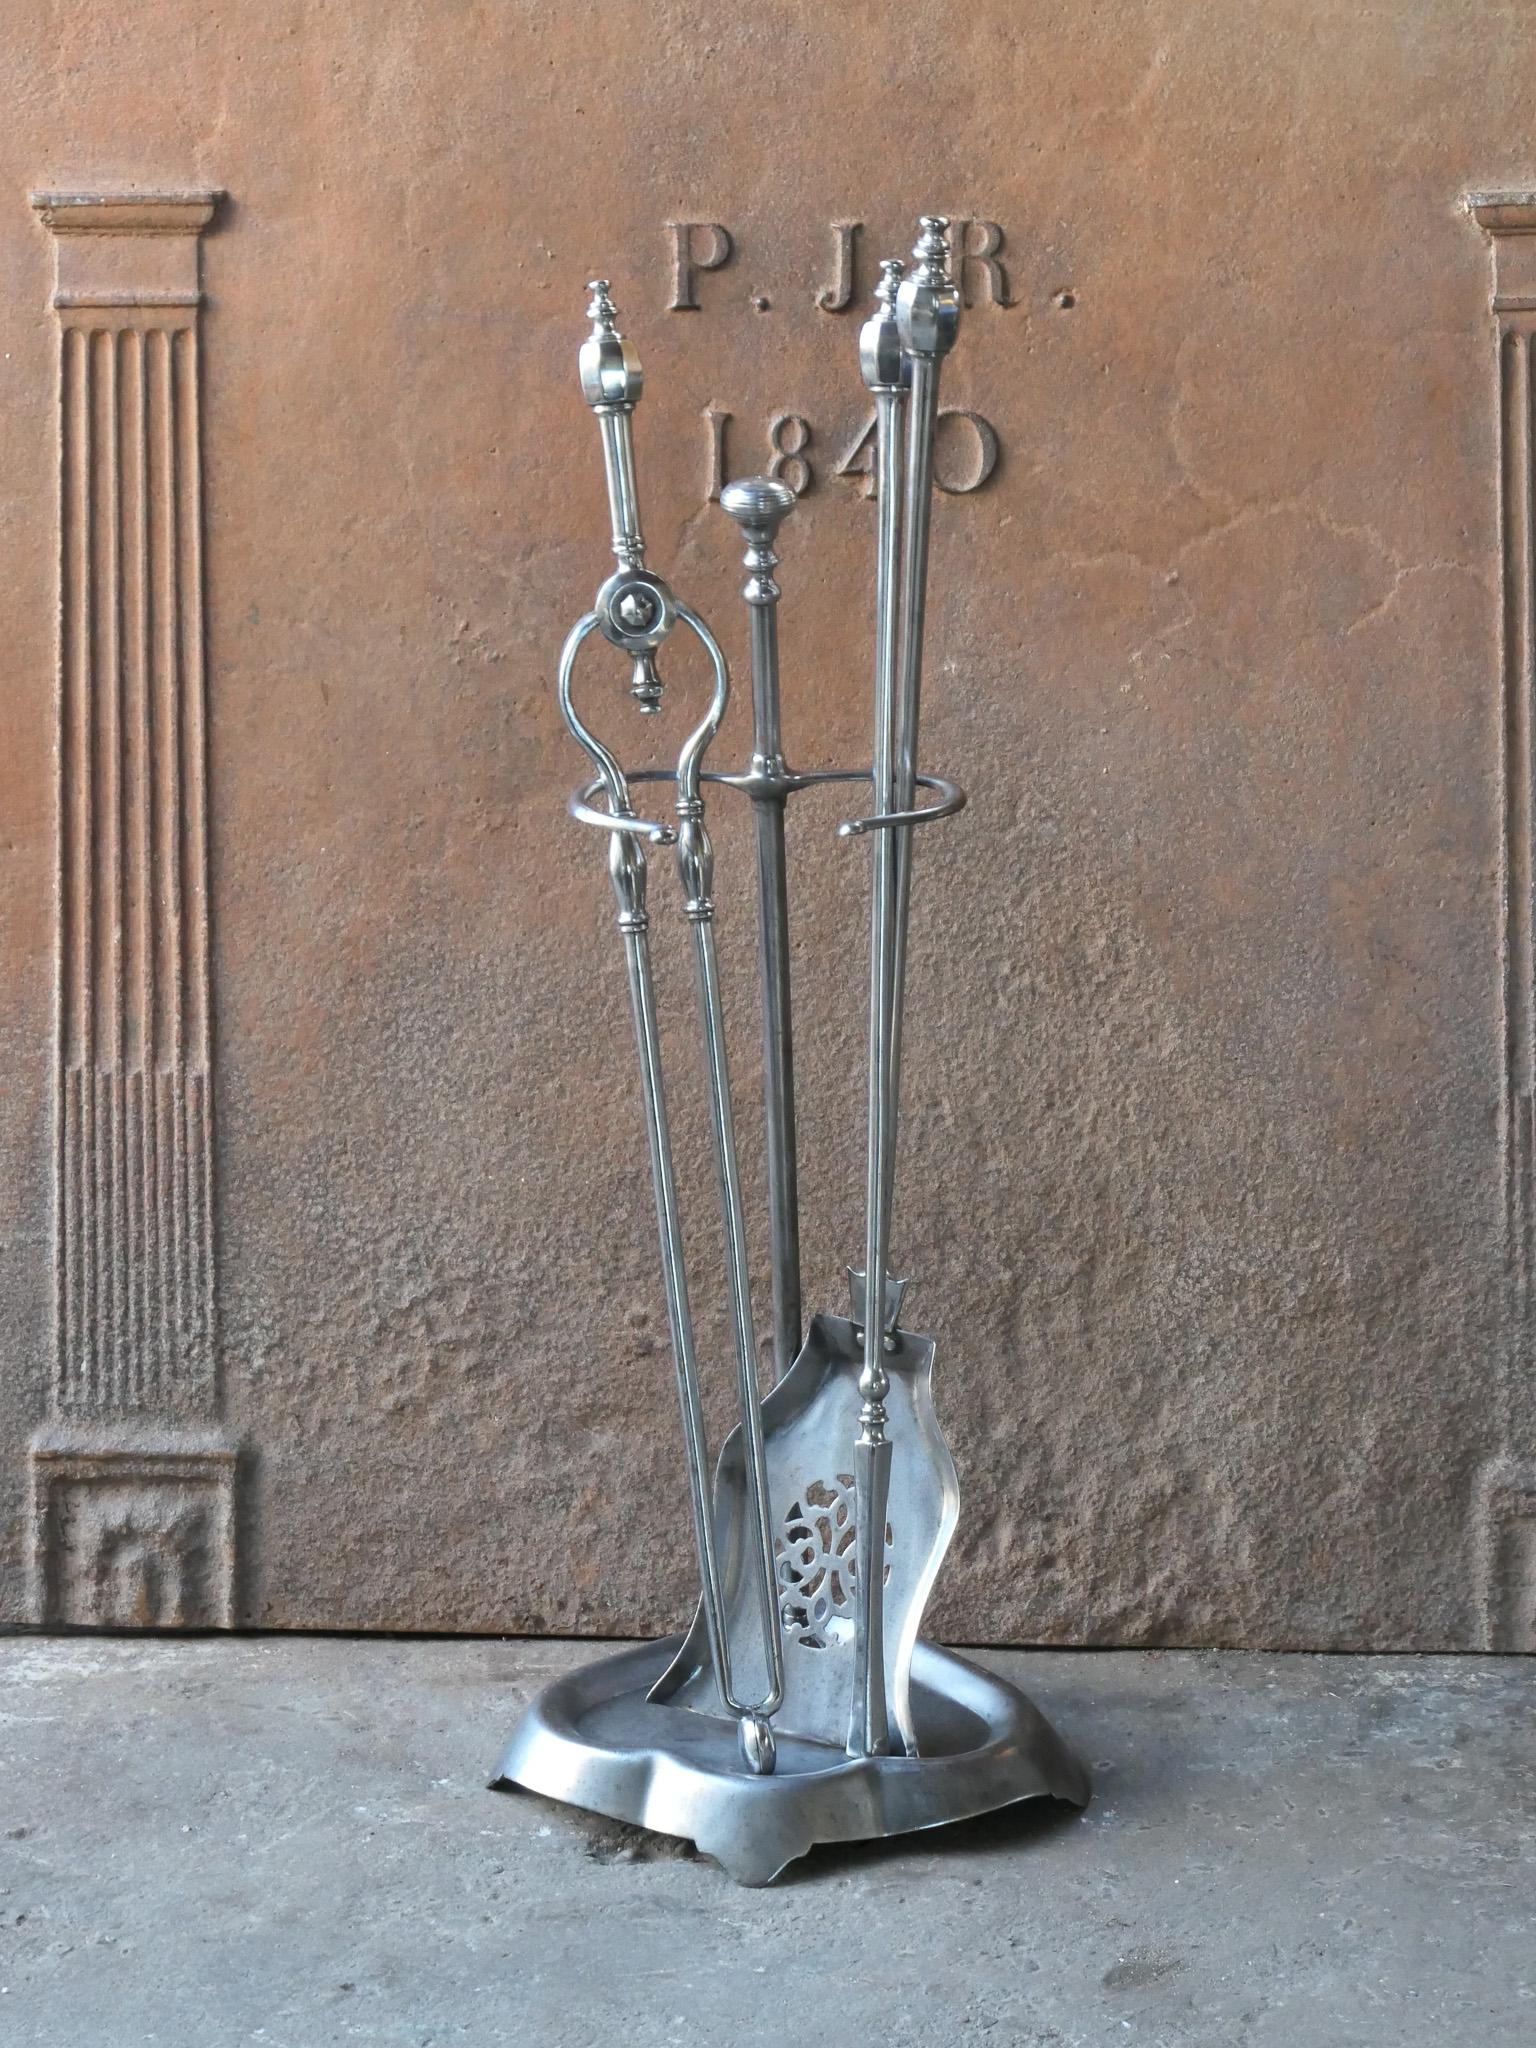 18/19th century English Georgian fireside companion set. The tool set consists of thongs, shovel, poker and stand. Made of polished steel. It is in a good condition and is fully functional.